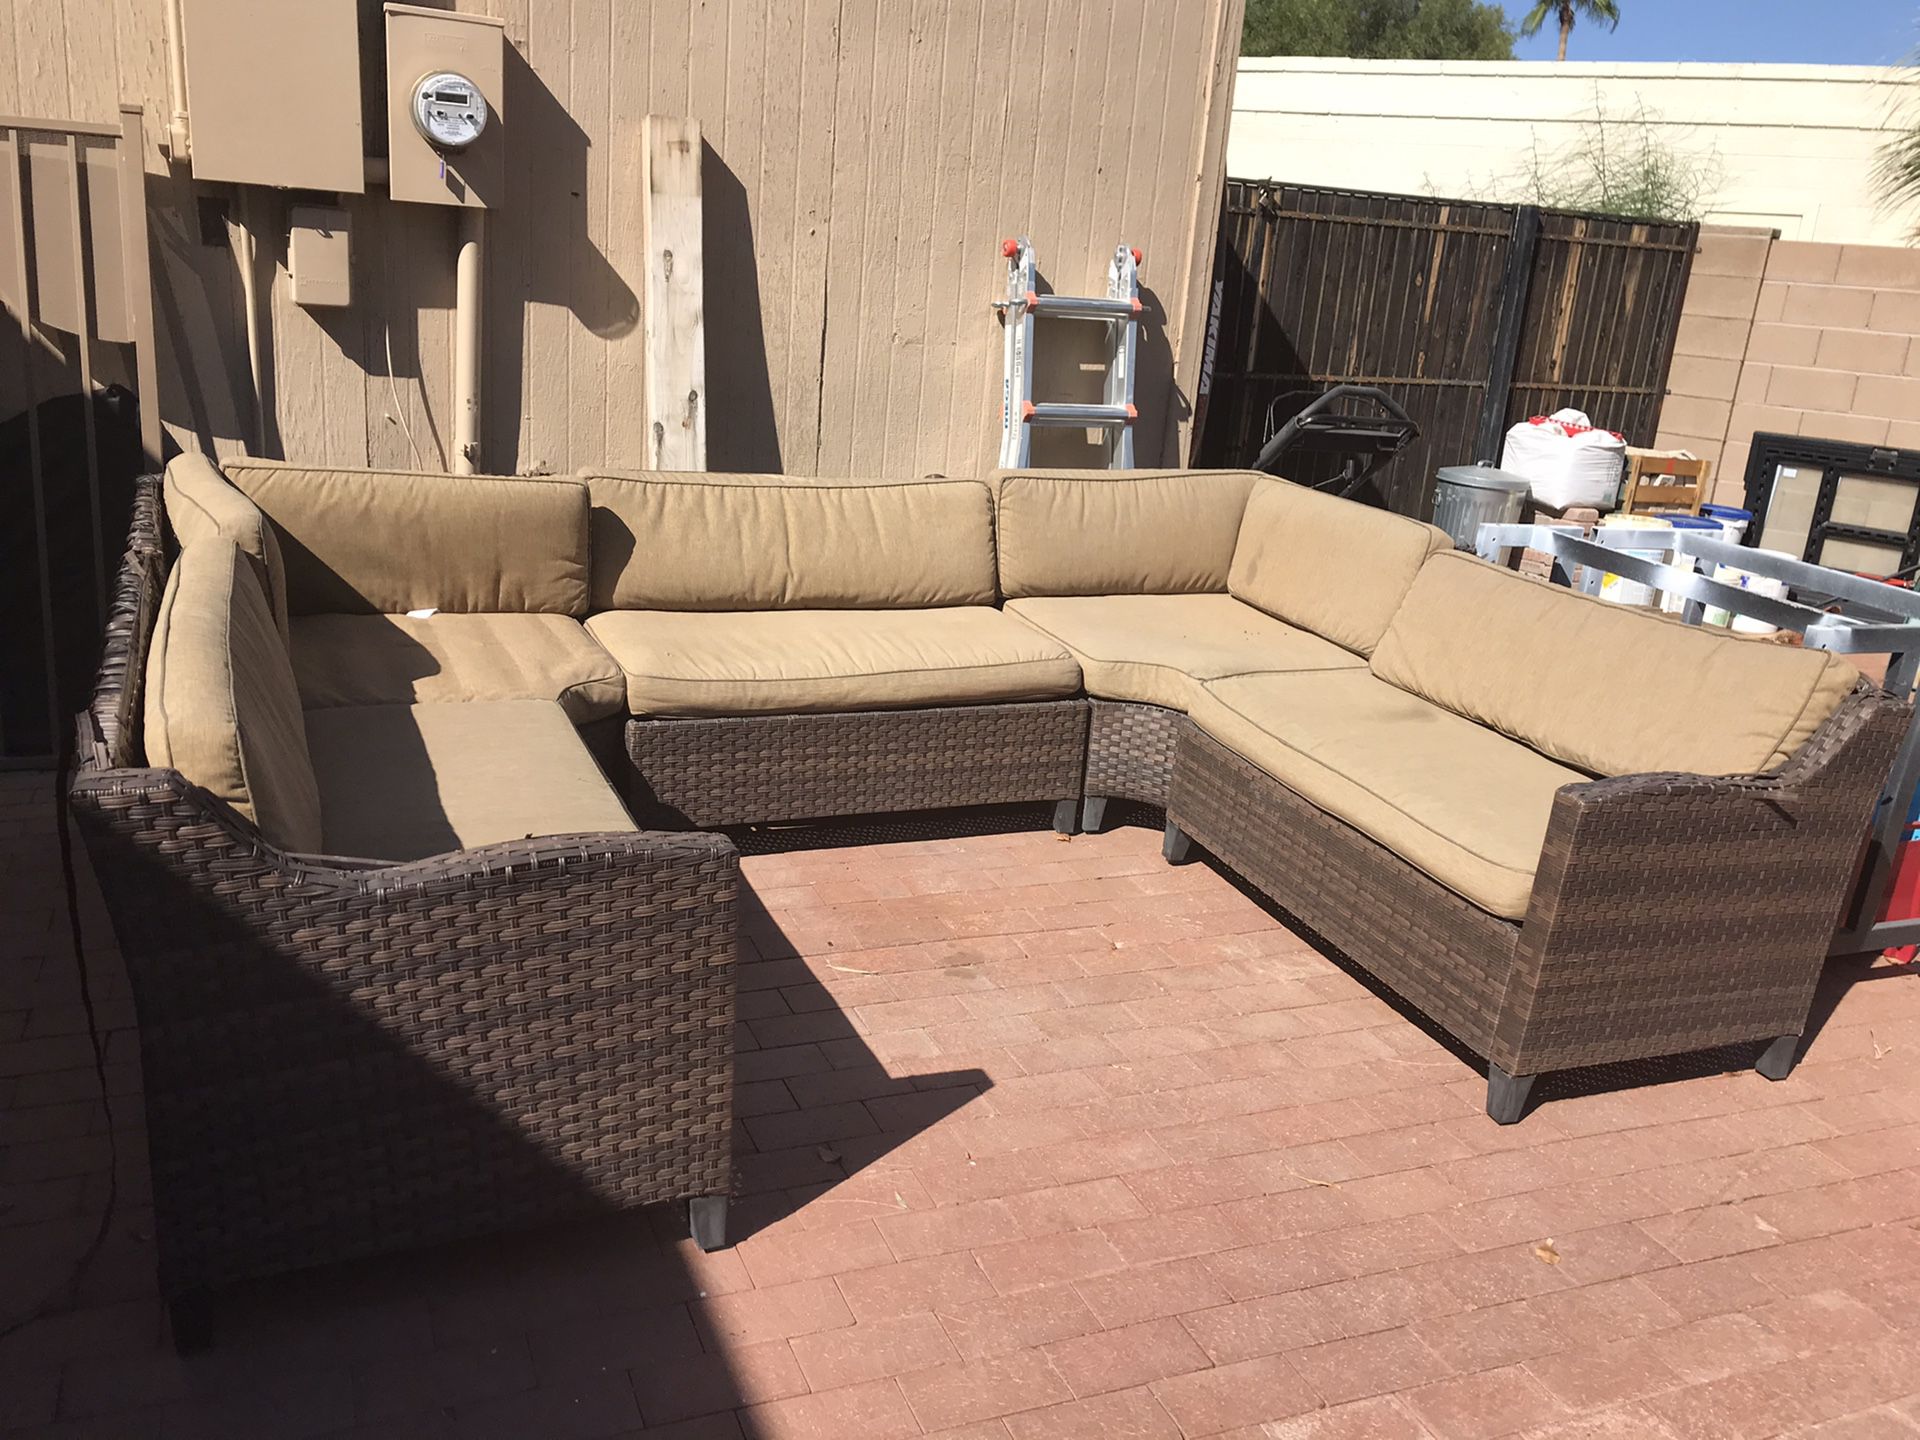 Outdoor patio sectional furniture in used condition